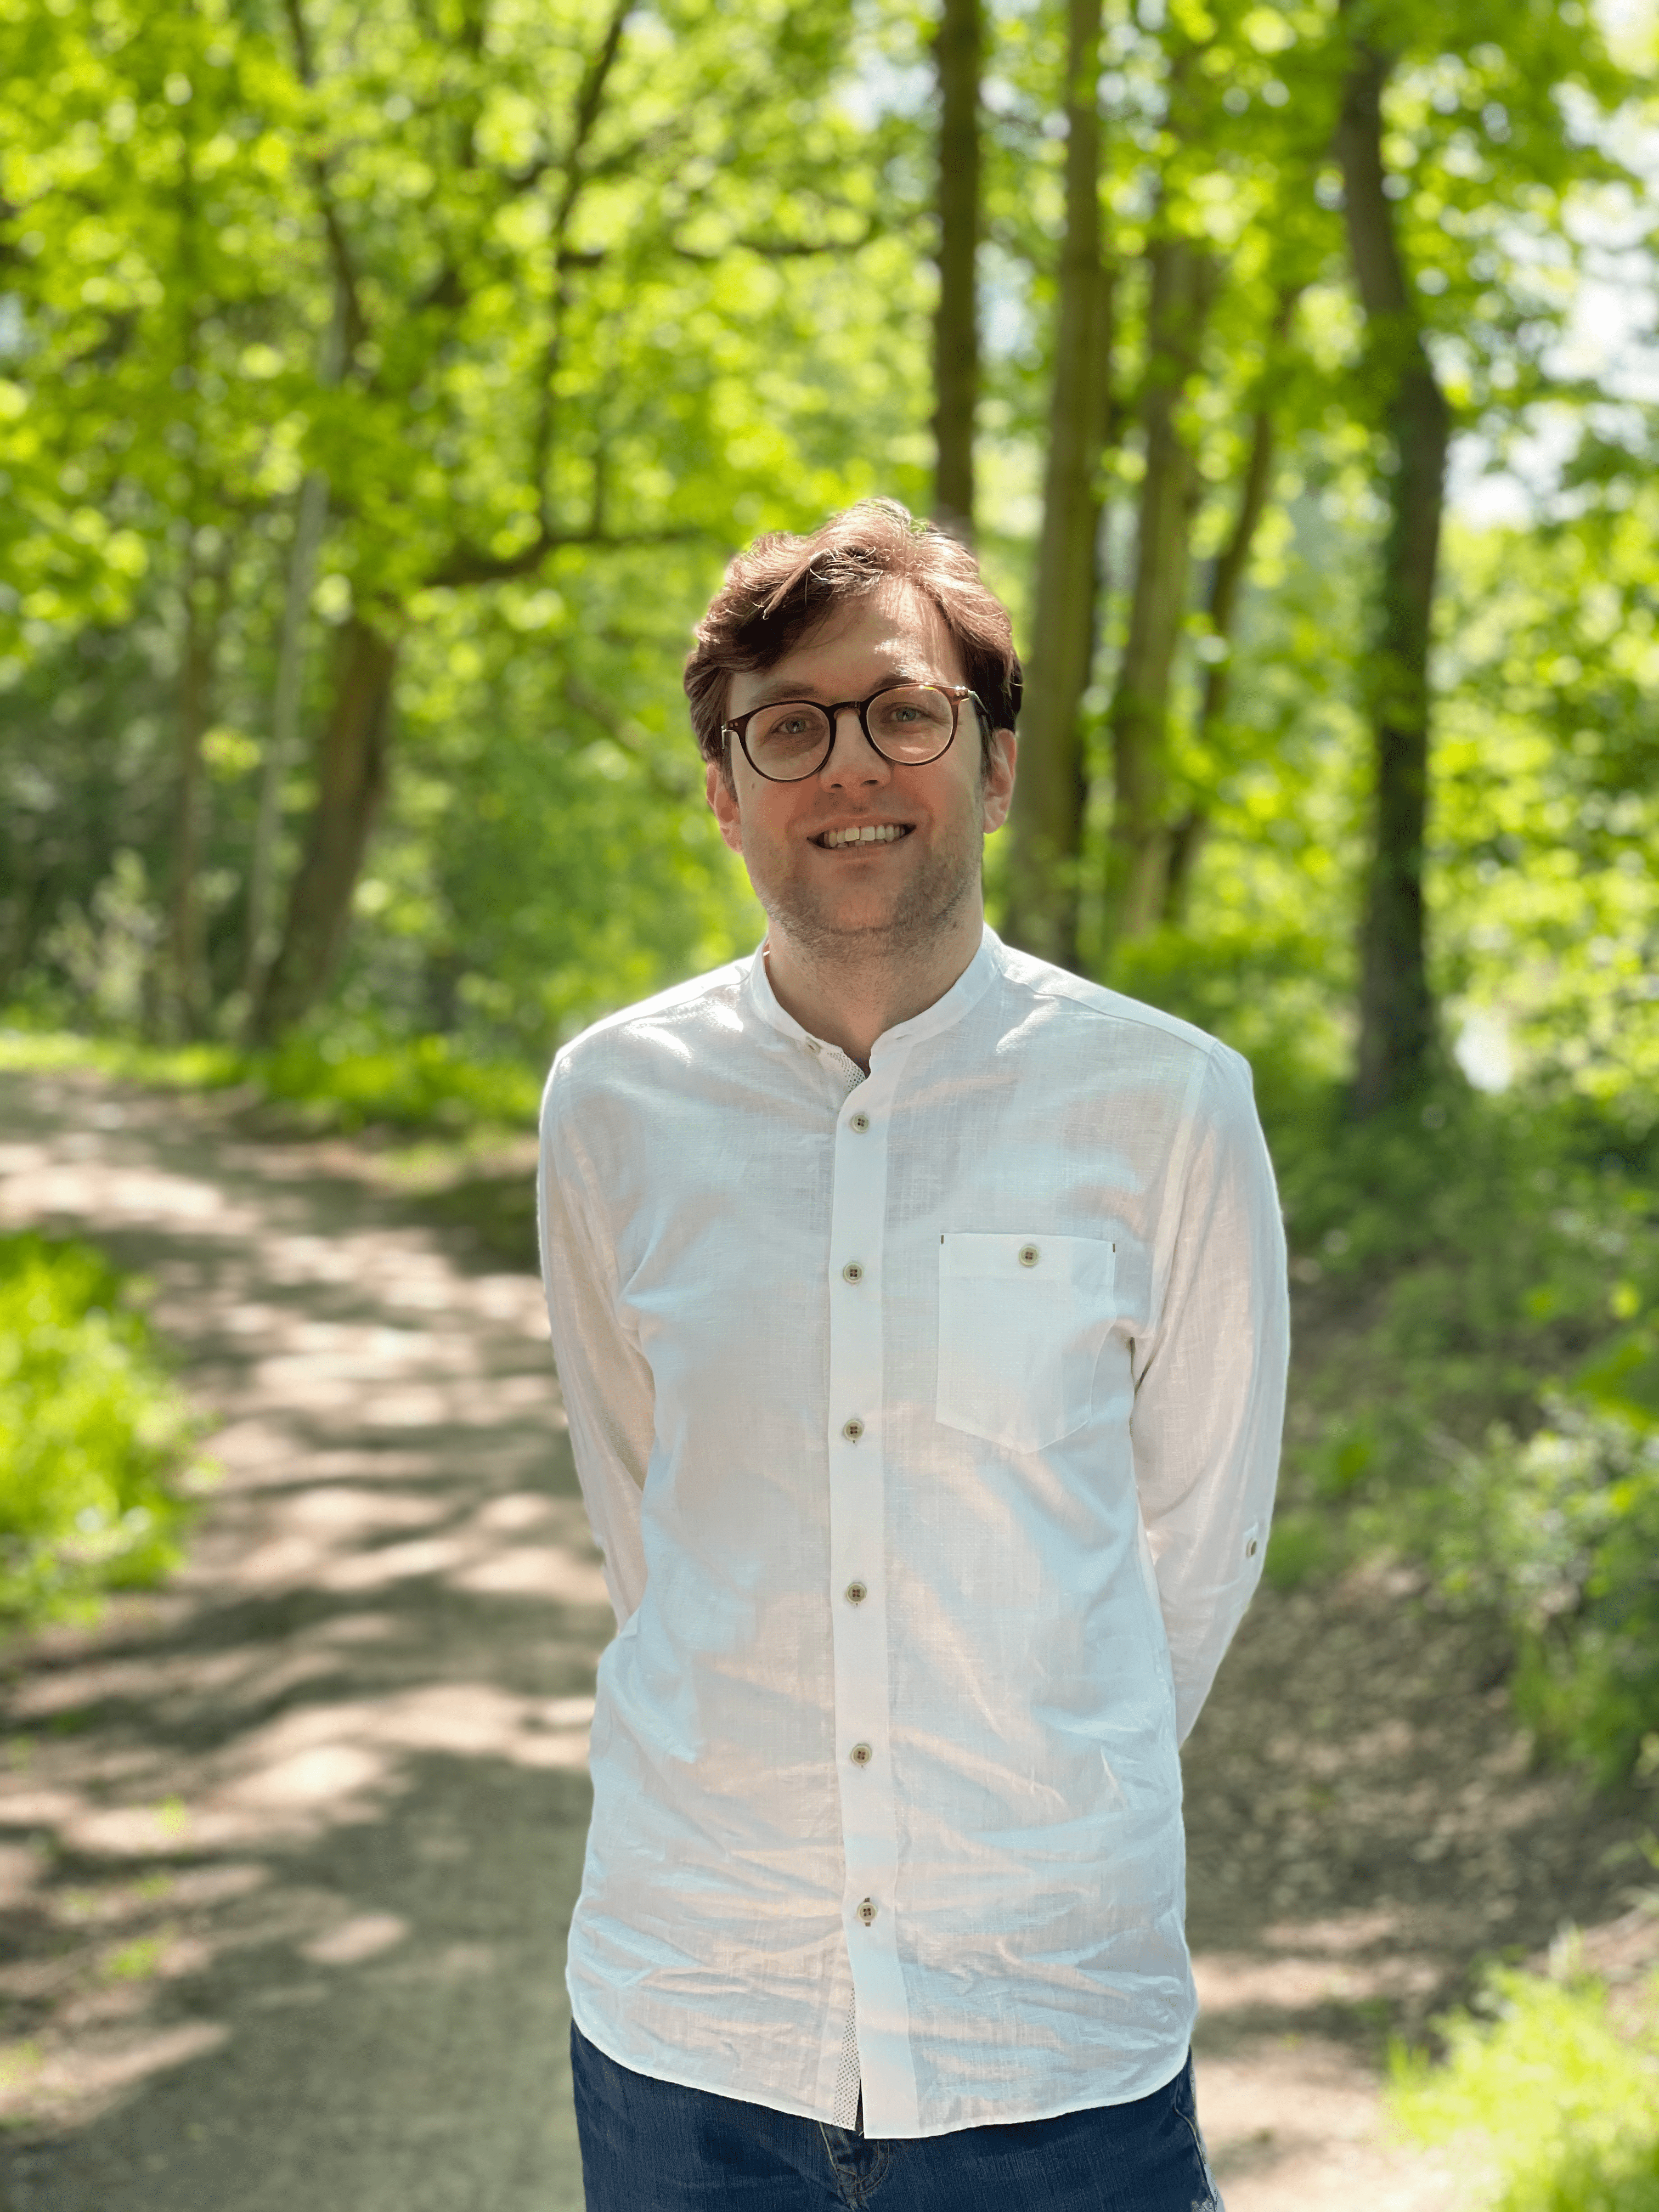 A photo of me, Sander, from the waist up. I'm wearing a white button-down shirt that is untucked, with round, brown glasses. The background consists of a path in a forest-like environment.